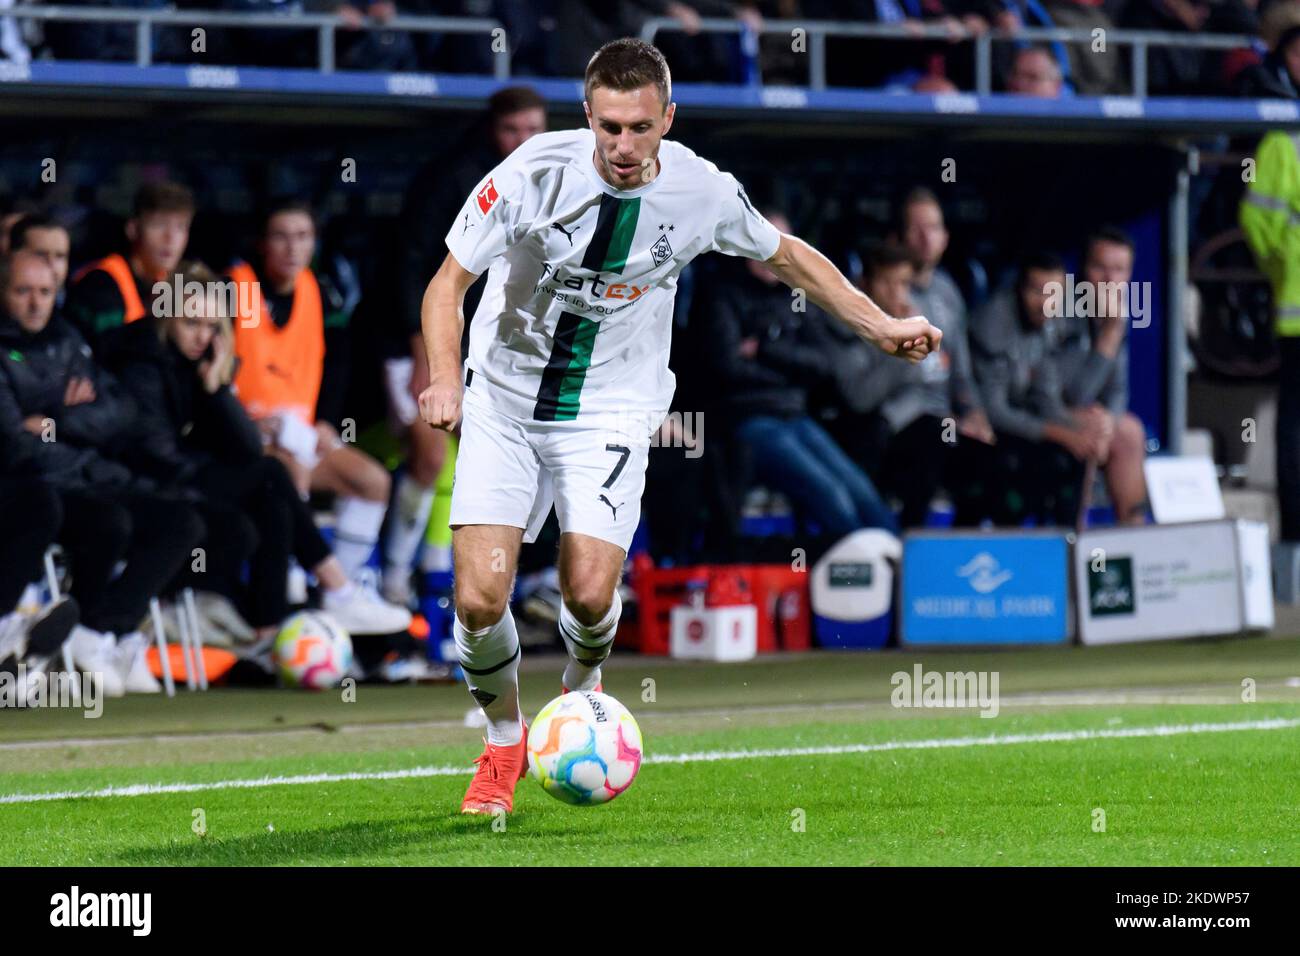 Patrick HERRMANN (MG) with ball, single action with ball, action, full length, whole figure, cut out, single image, single player, single action, football 1st Bundesliga, 14th matchday, VfL Bochum (BO) - Borussia Monchengladbach ( MG) 2: 1, on November 8th, 2022 in Bochum/Germany. Stock Photo